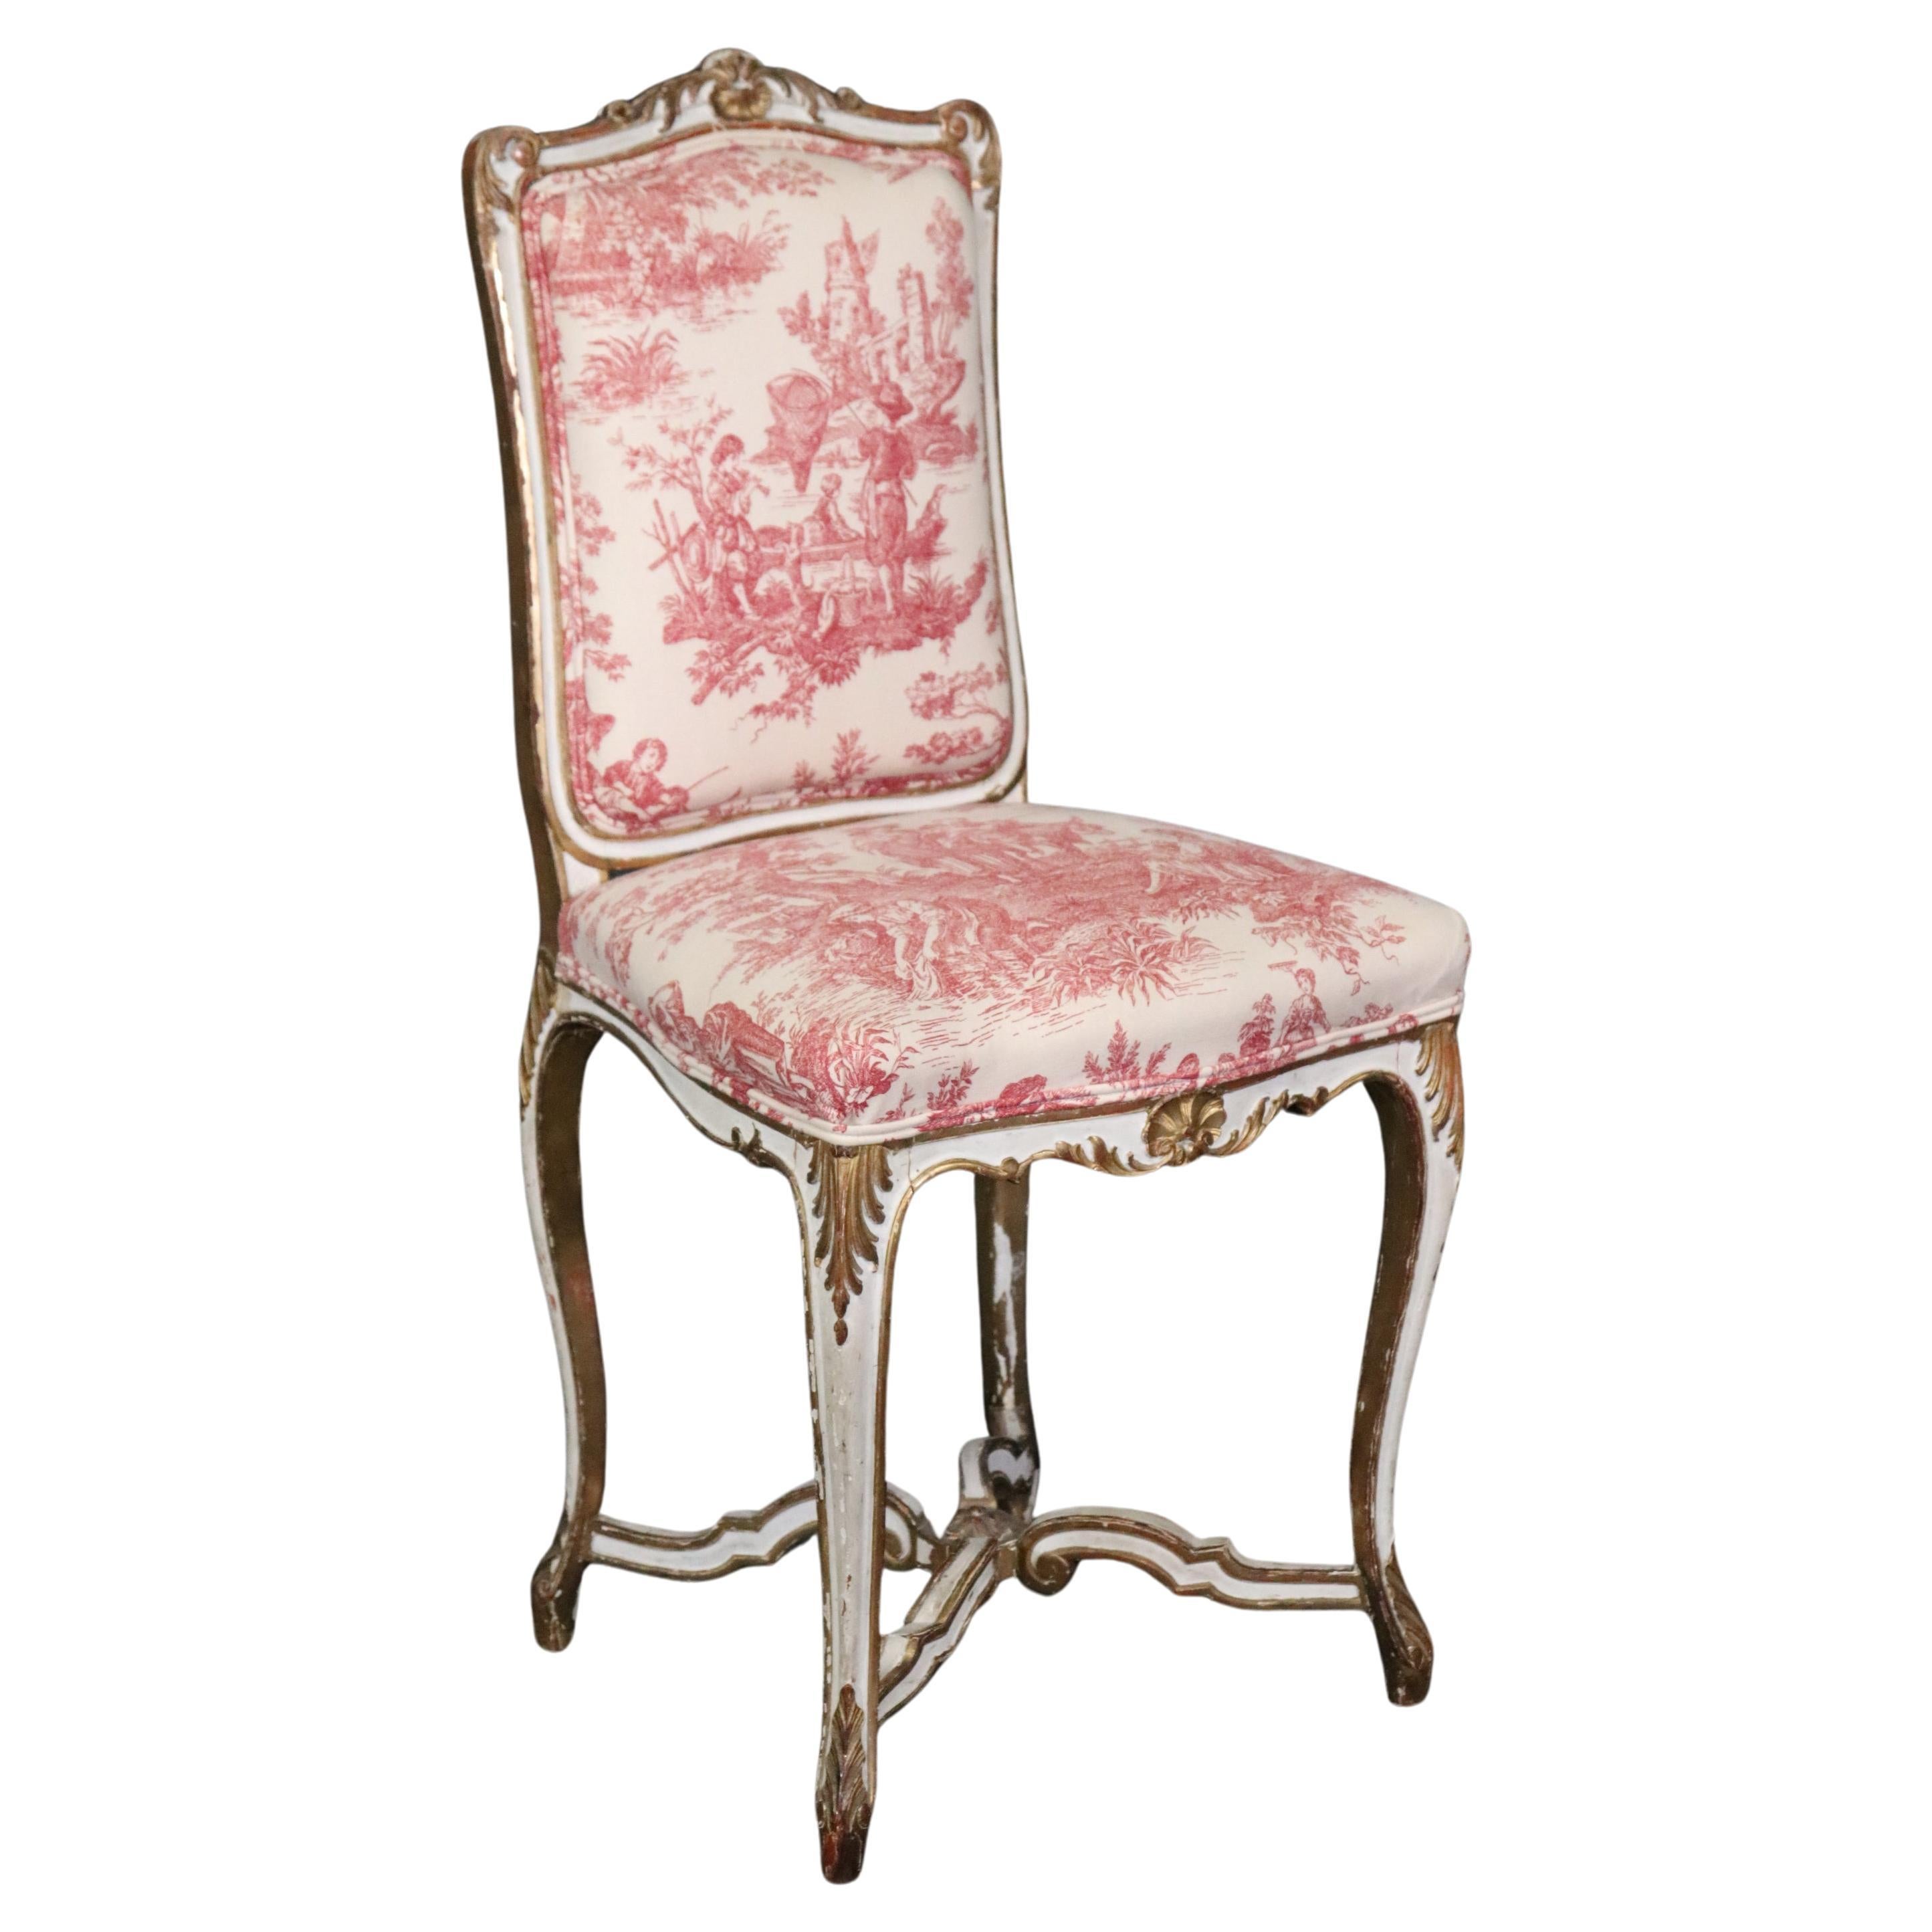 Antique Louis XV Rococo Style French Paint Decorated & Gilt Desk Chair